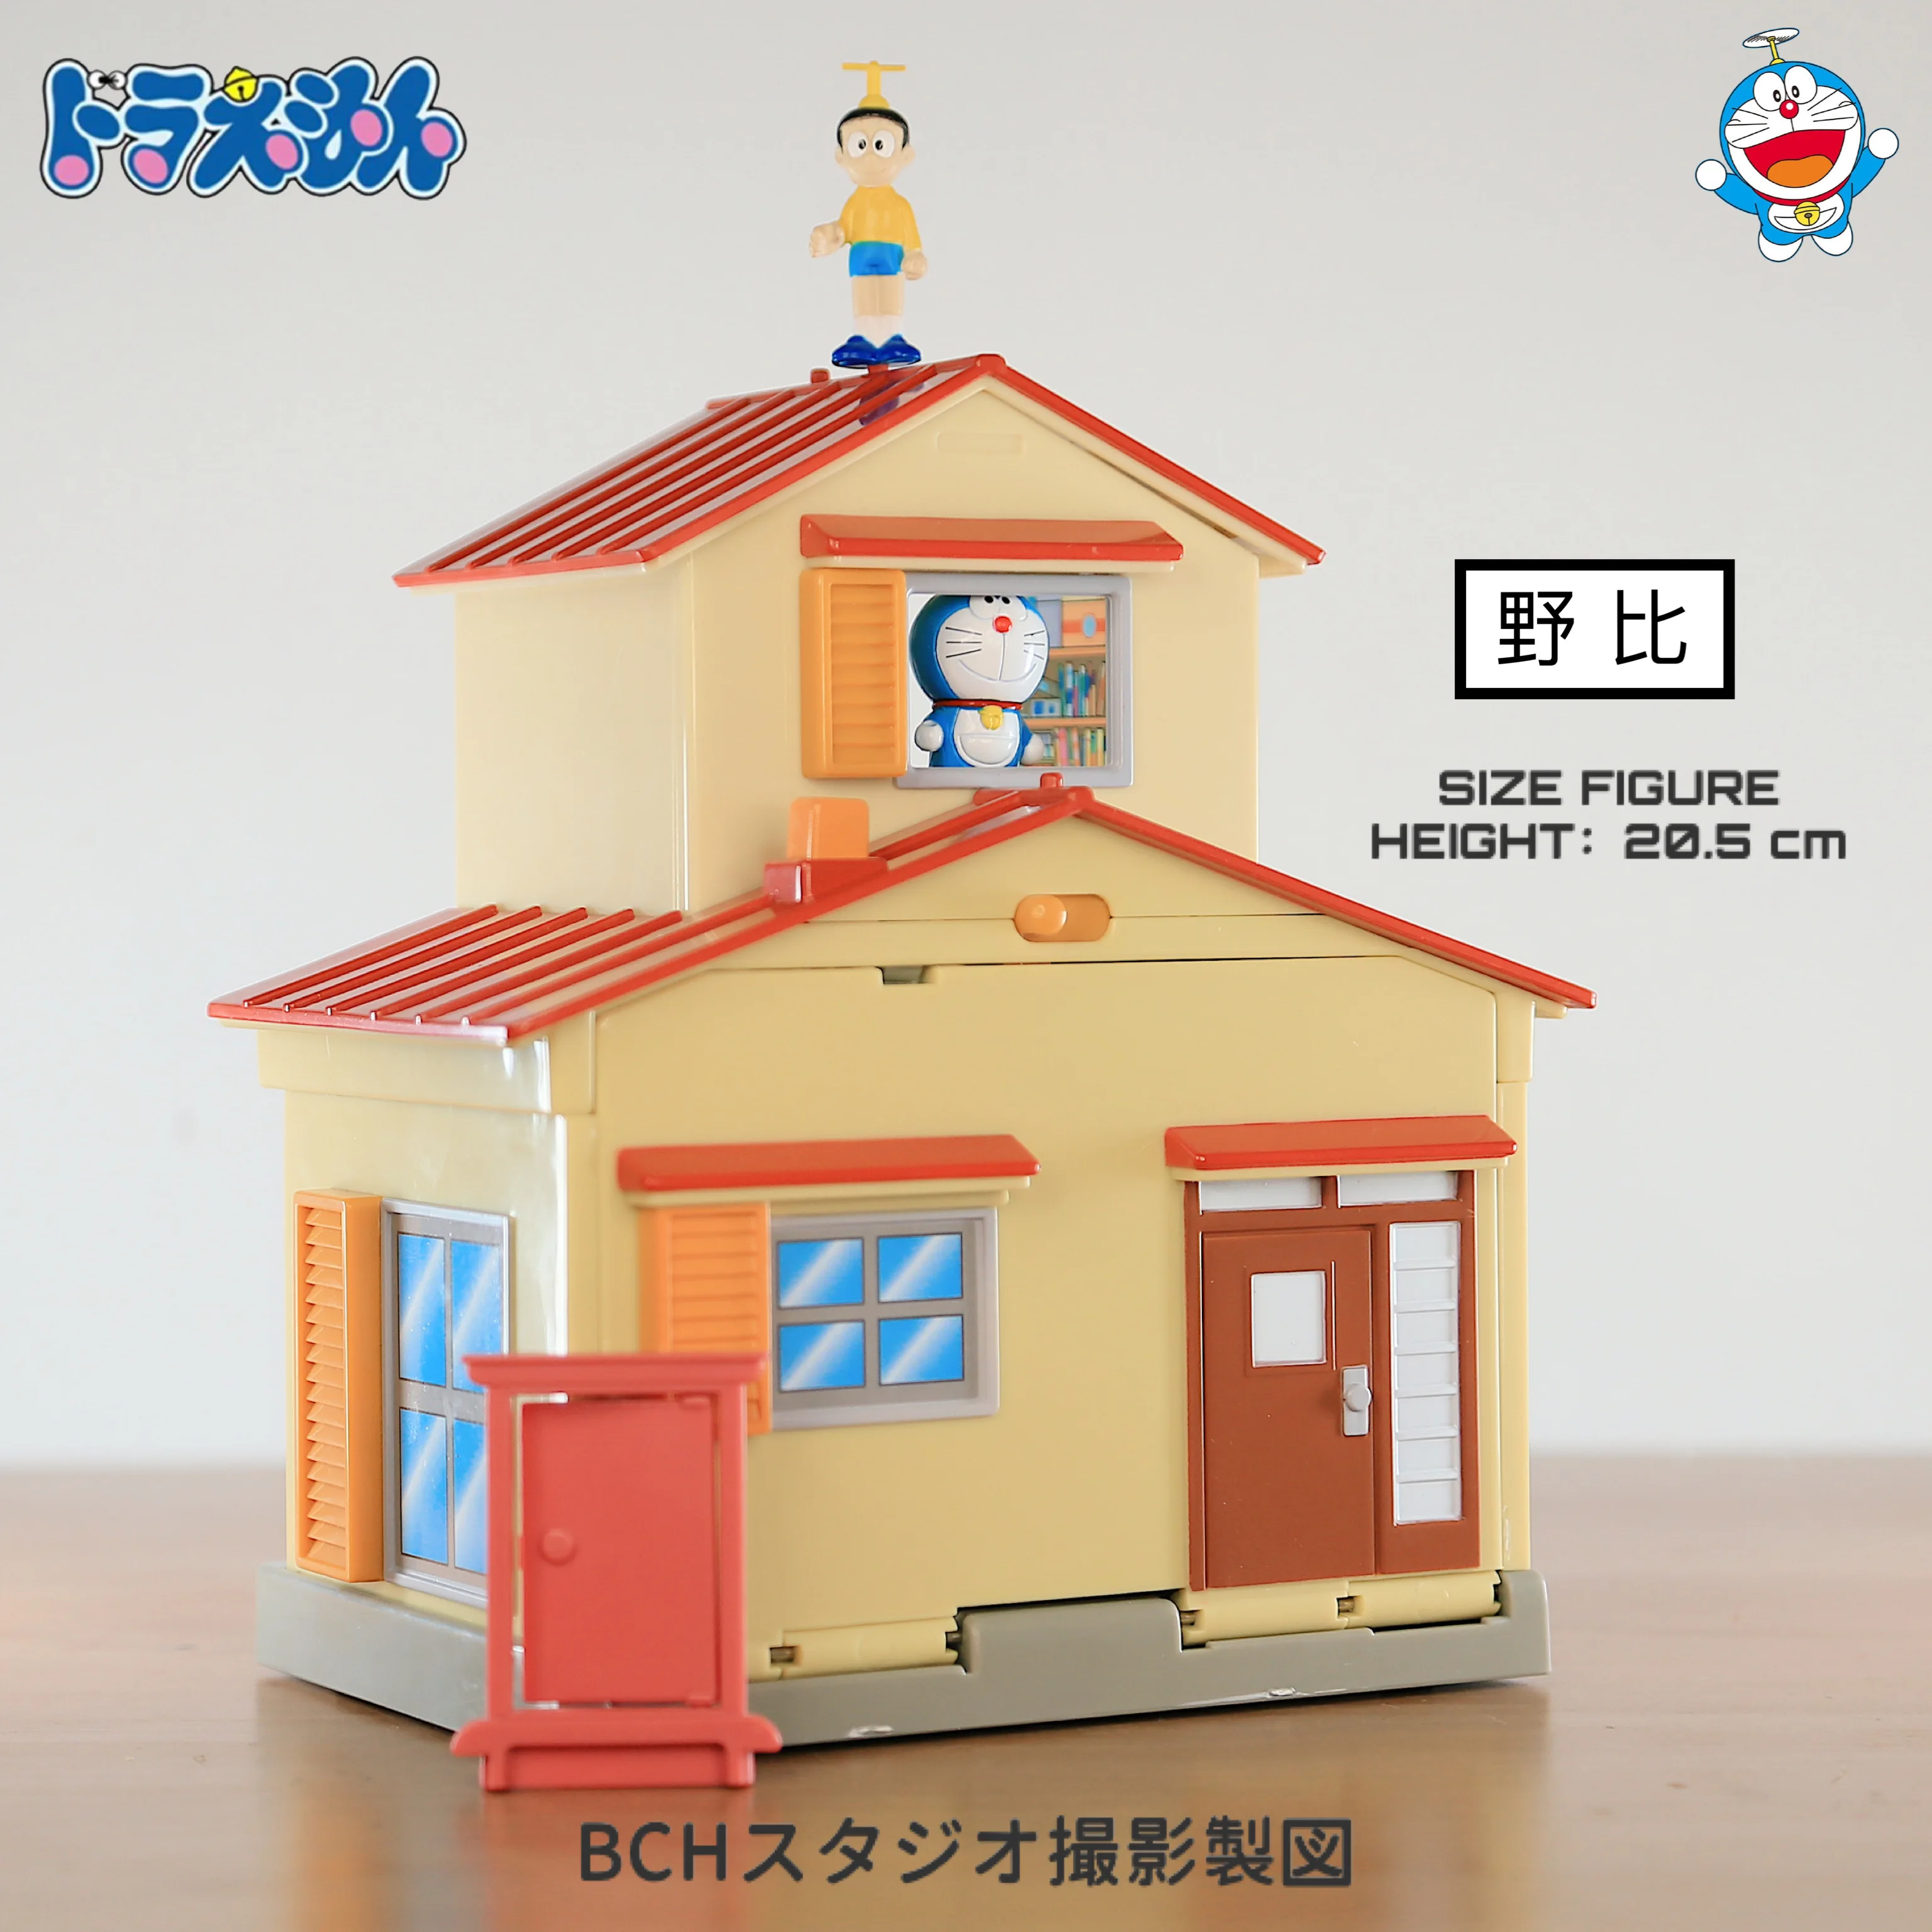 

Anime Doraemon Nobi Nobita's Home Model 4 Scenes Japanese Can Be Switched Action Figures Toys Collectibles Model Ornaments Gifts